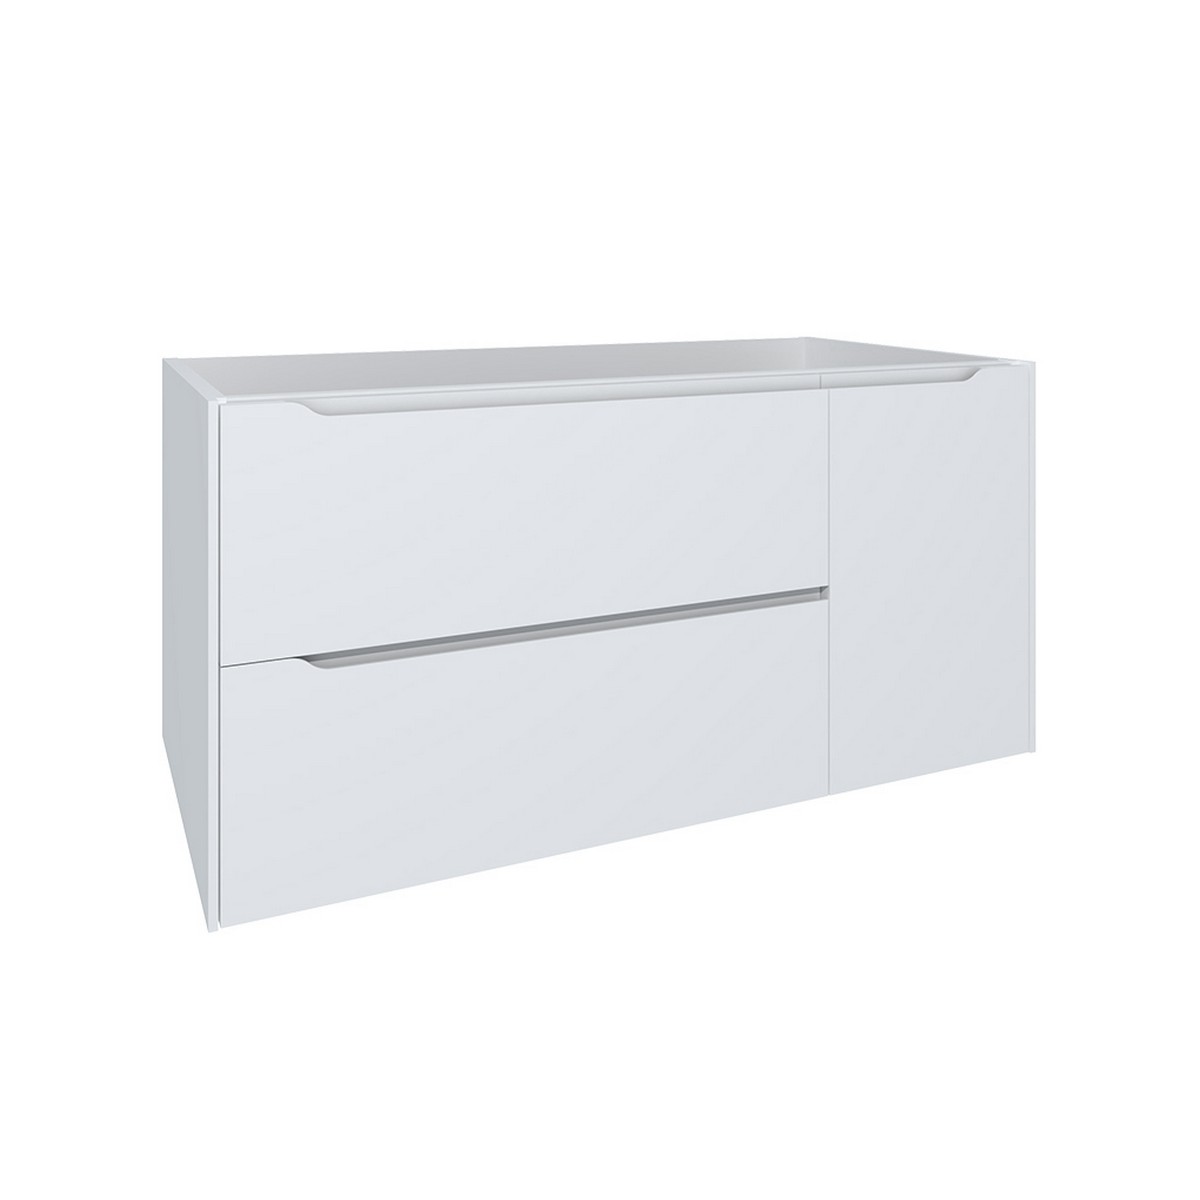 DAX DAX-CEN0240 CENIT 40 INCH WALL-MOUNTED SINGLE SINK BATHROOM VANITY CABINET ONLY